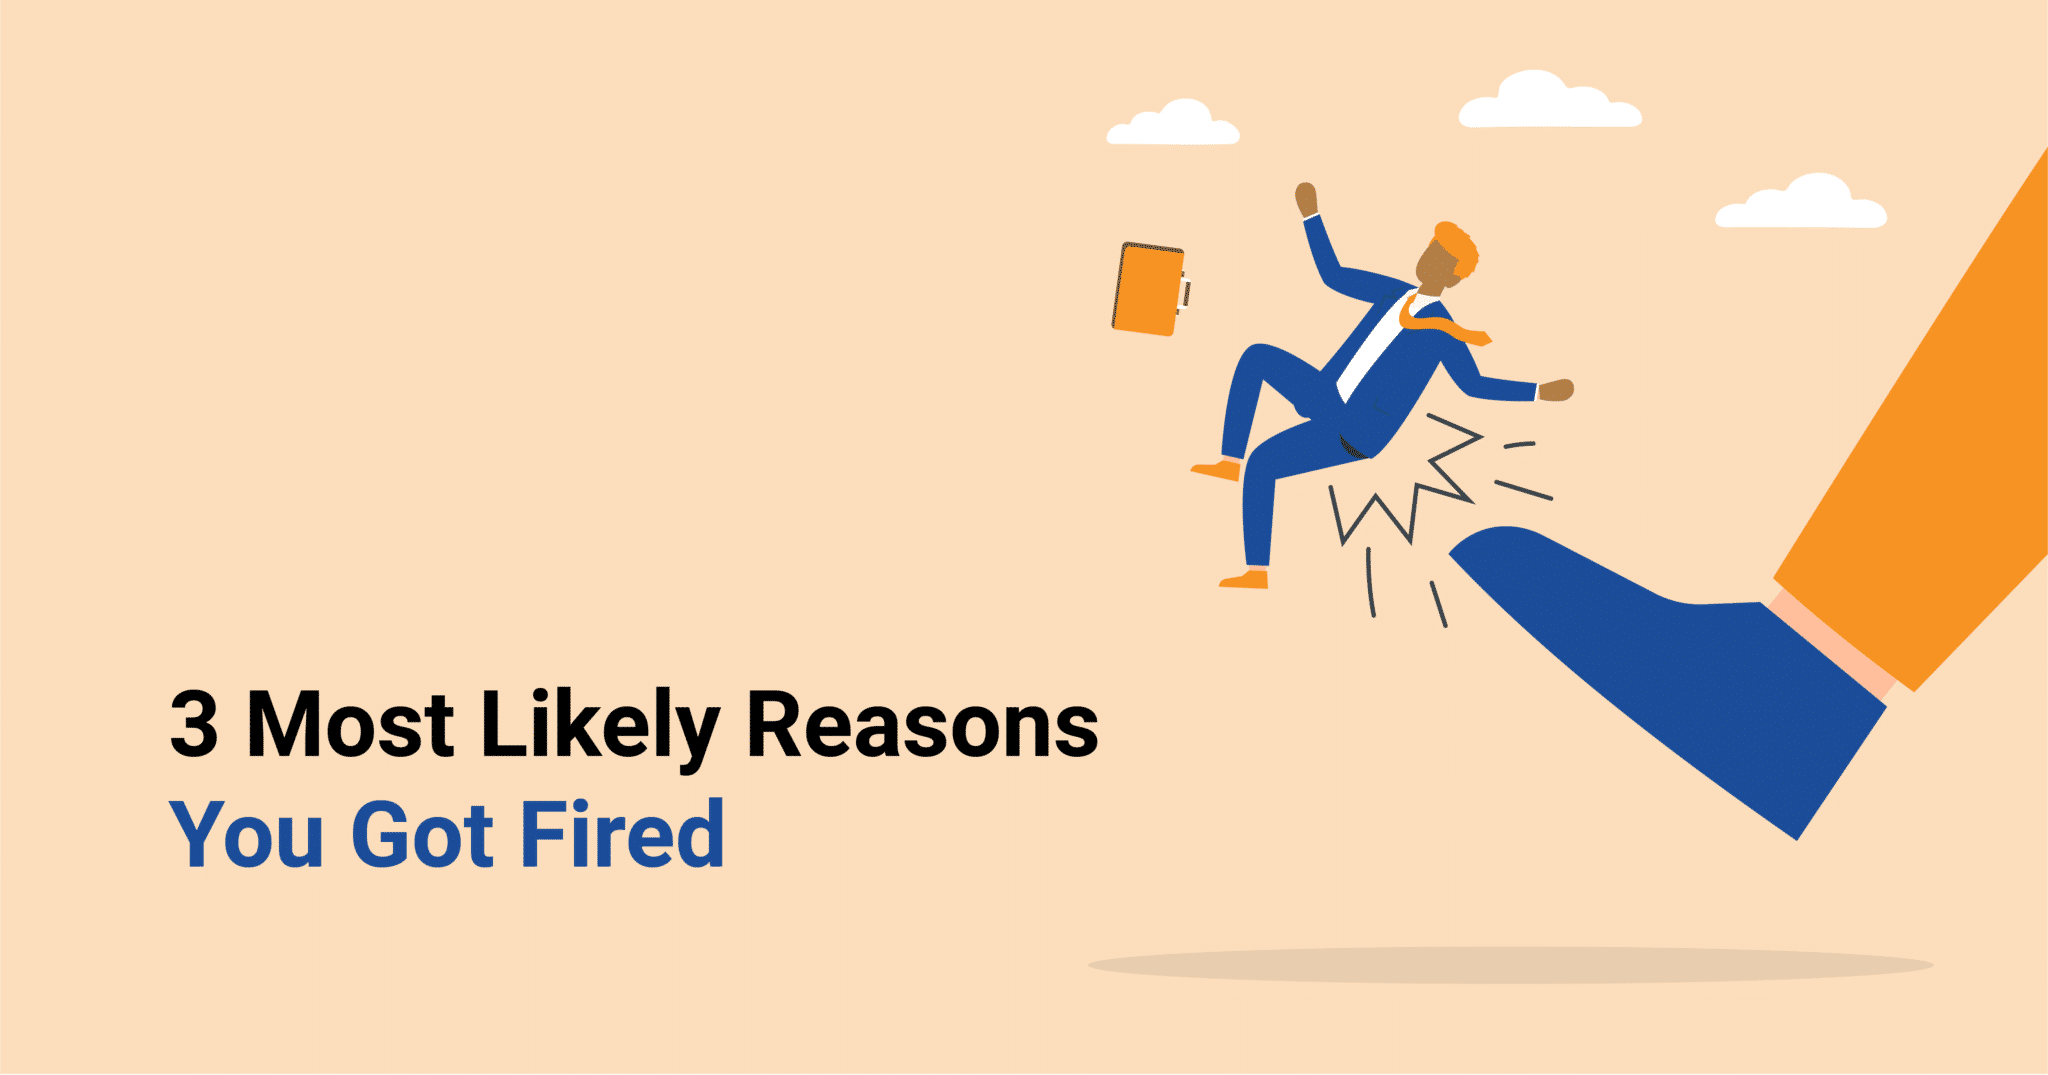 3 Most Likely Reasons You Got Fired